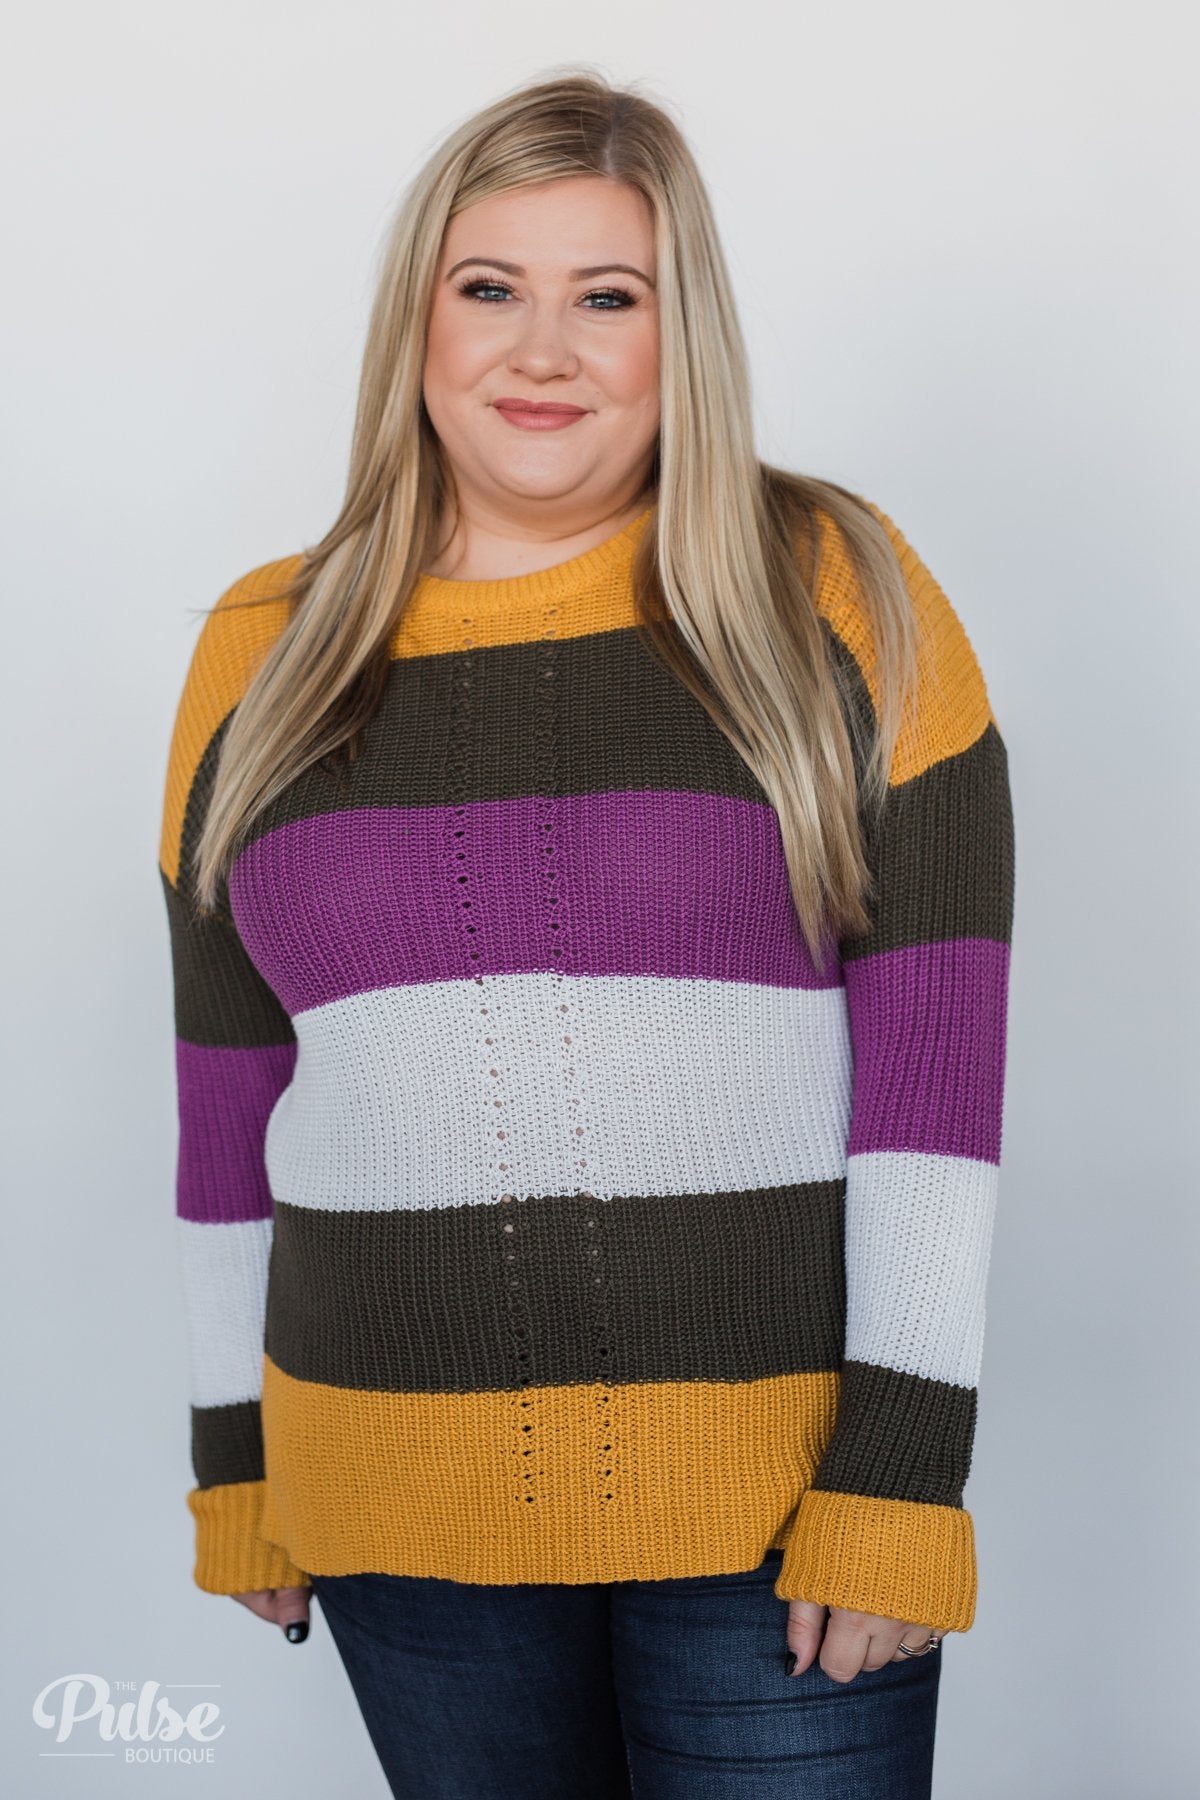 The Way to You Knitted Sweater- Mustard, Olive, & Purple